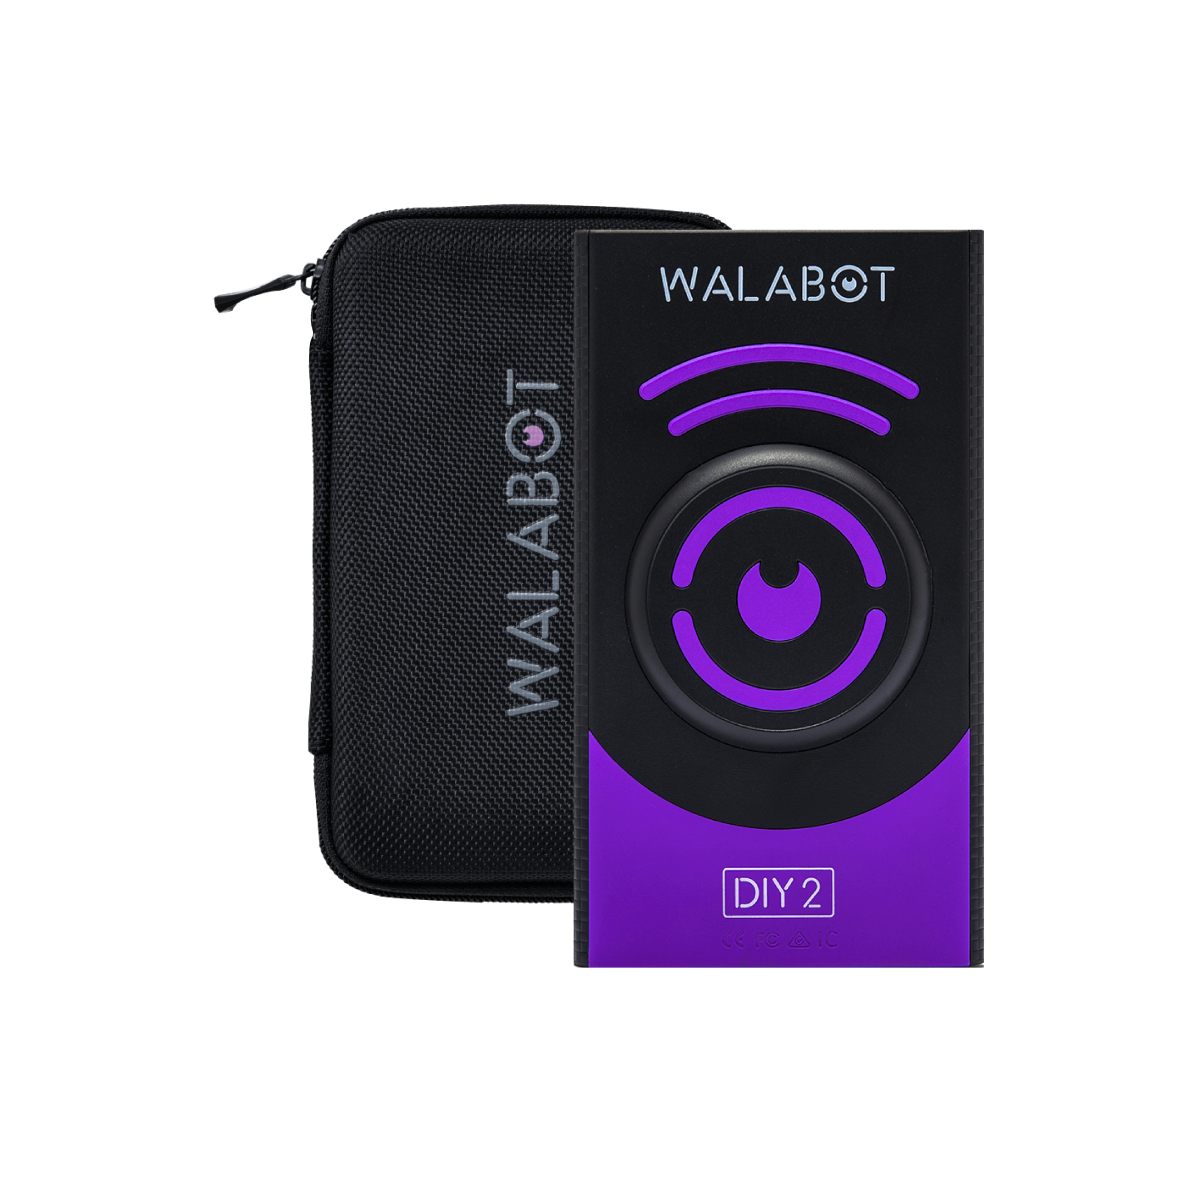 Walabot DIY 2 - Advanced Stud Finder and Wall Scanner for Android and iOS w/Case